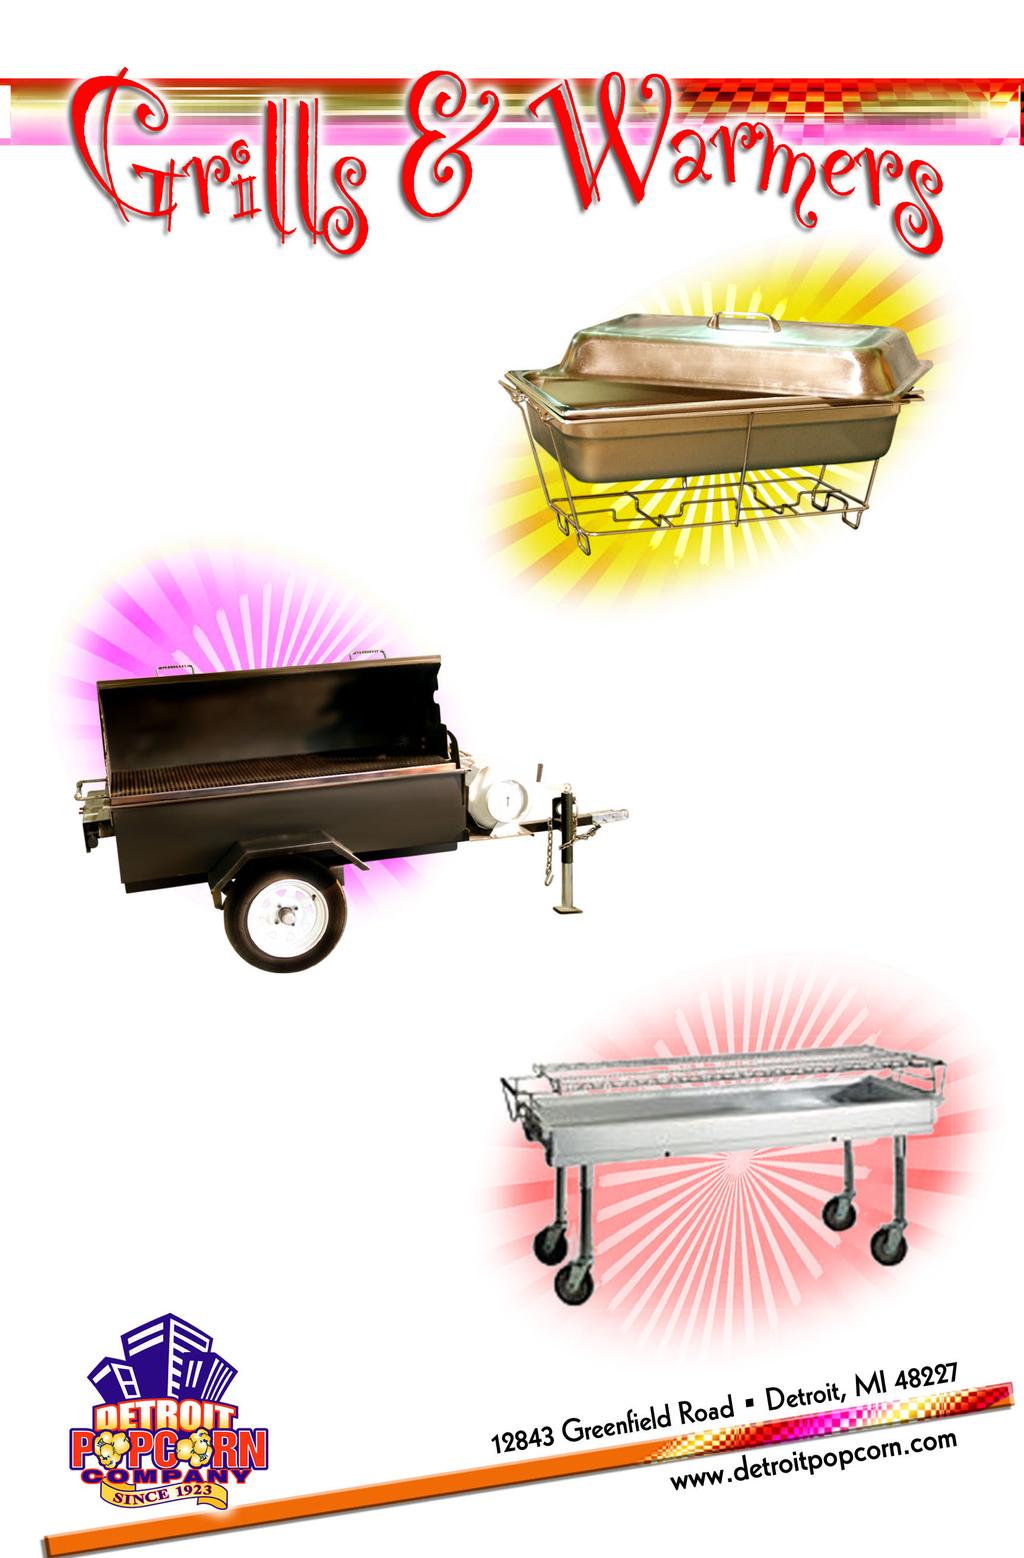 # 181 4 Piece Chafing Dish Set These units are ideal for any buffet style hot food dispensing. They are heated with sterno.